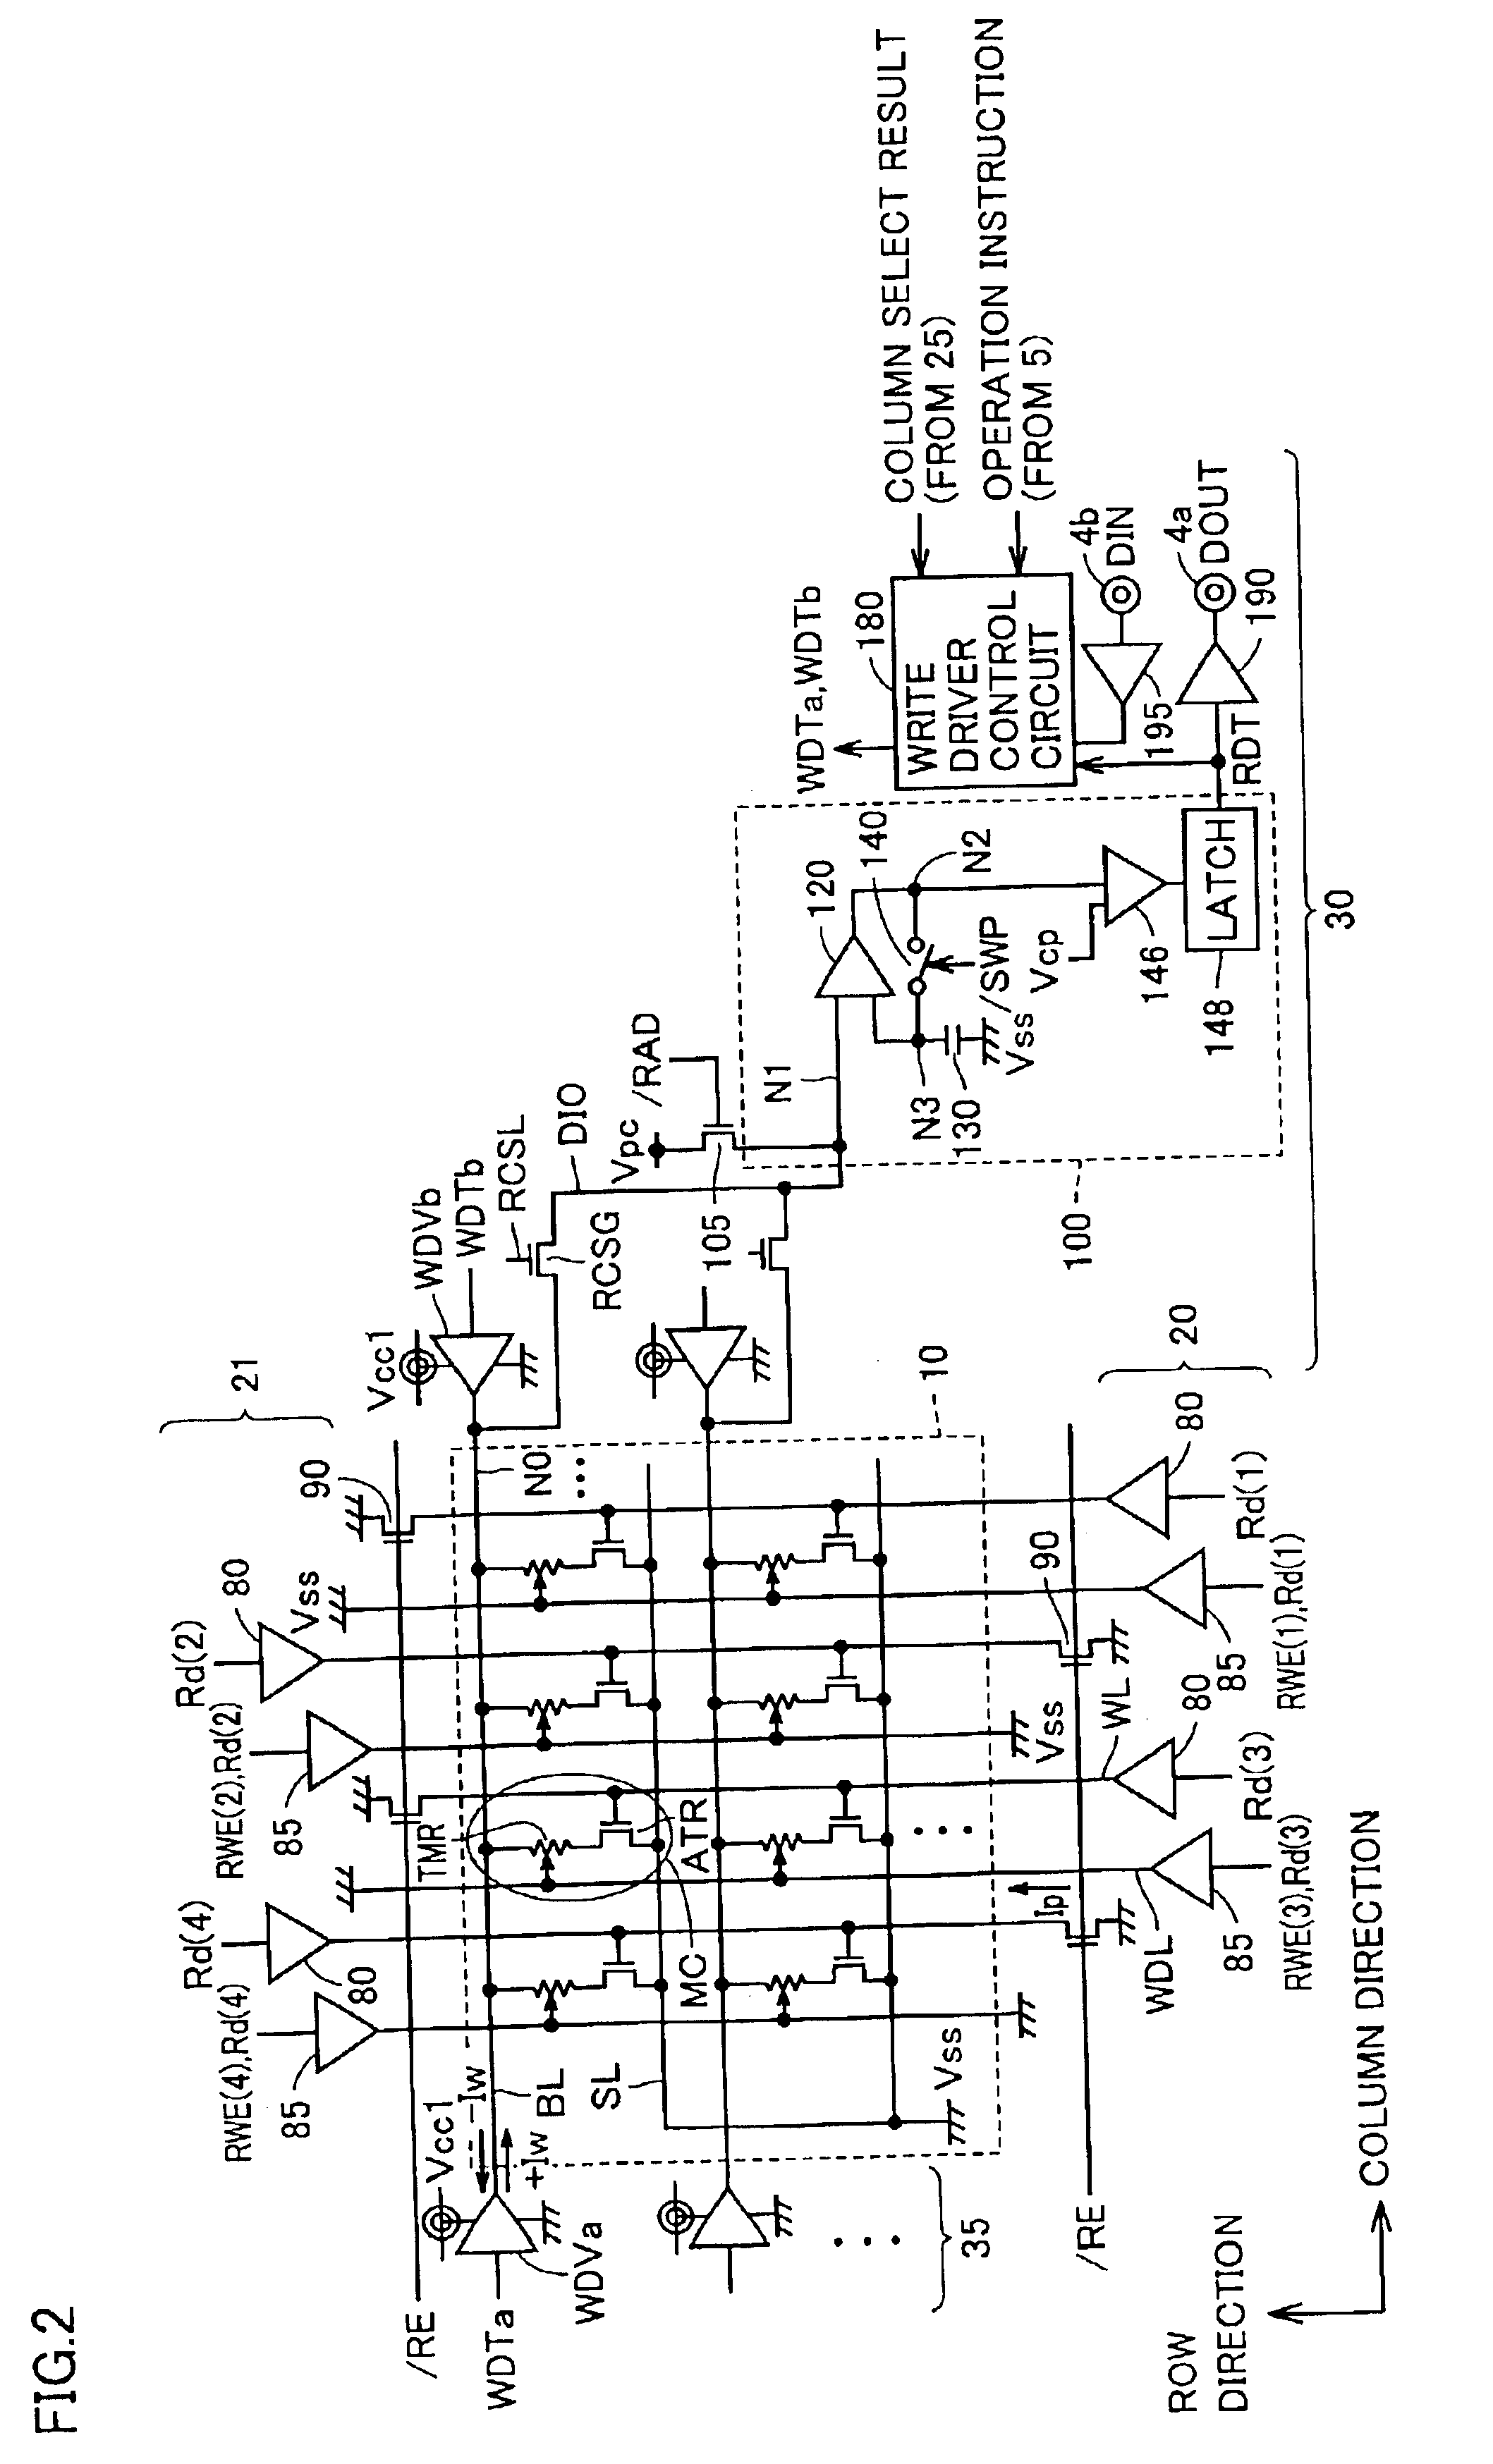 Thin film magnetic memory device executing self-reference type data read